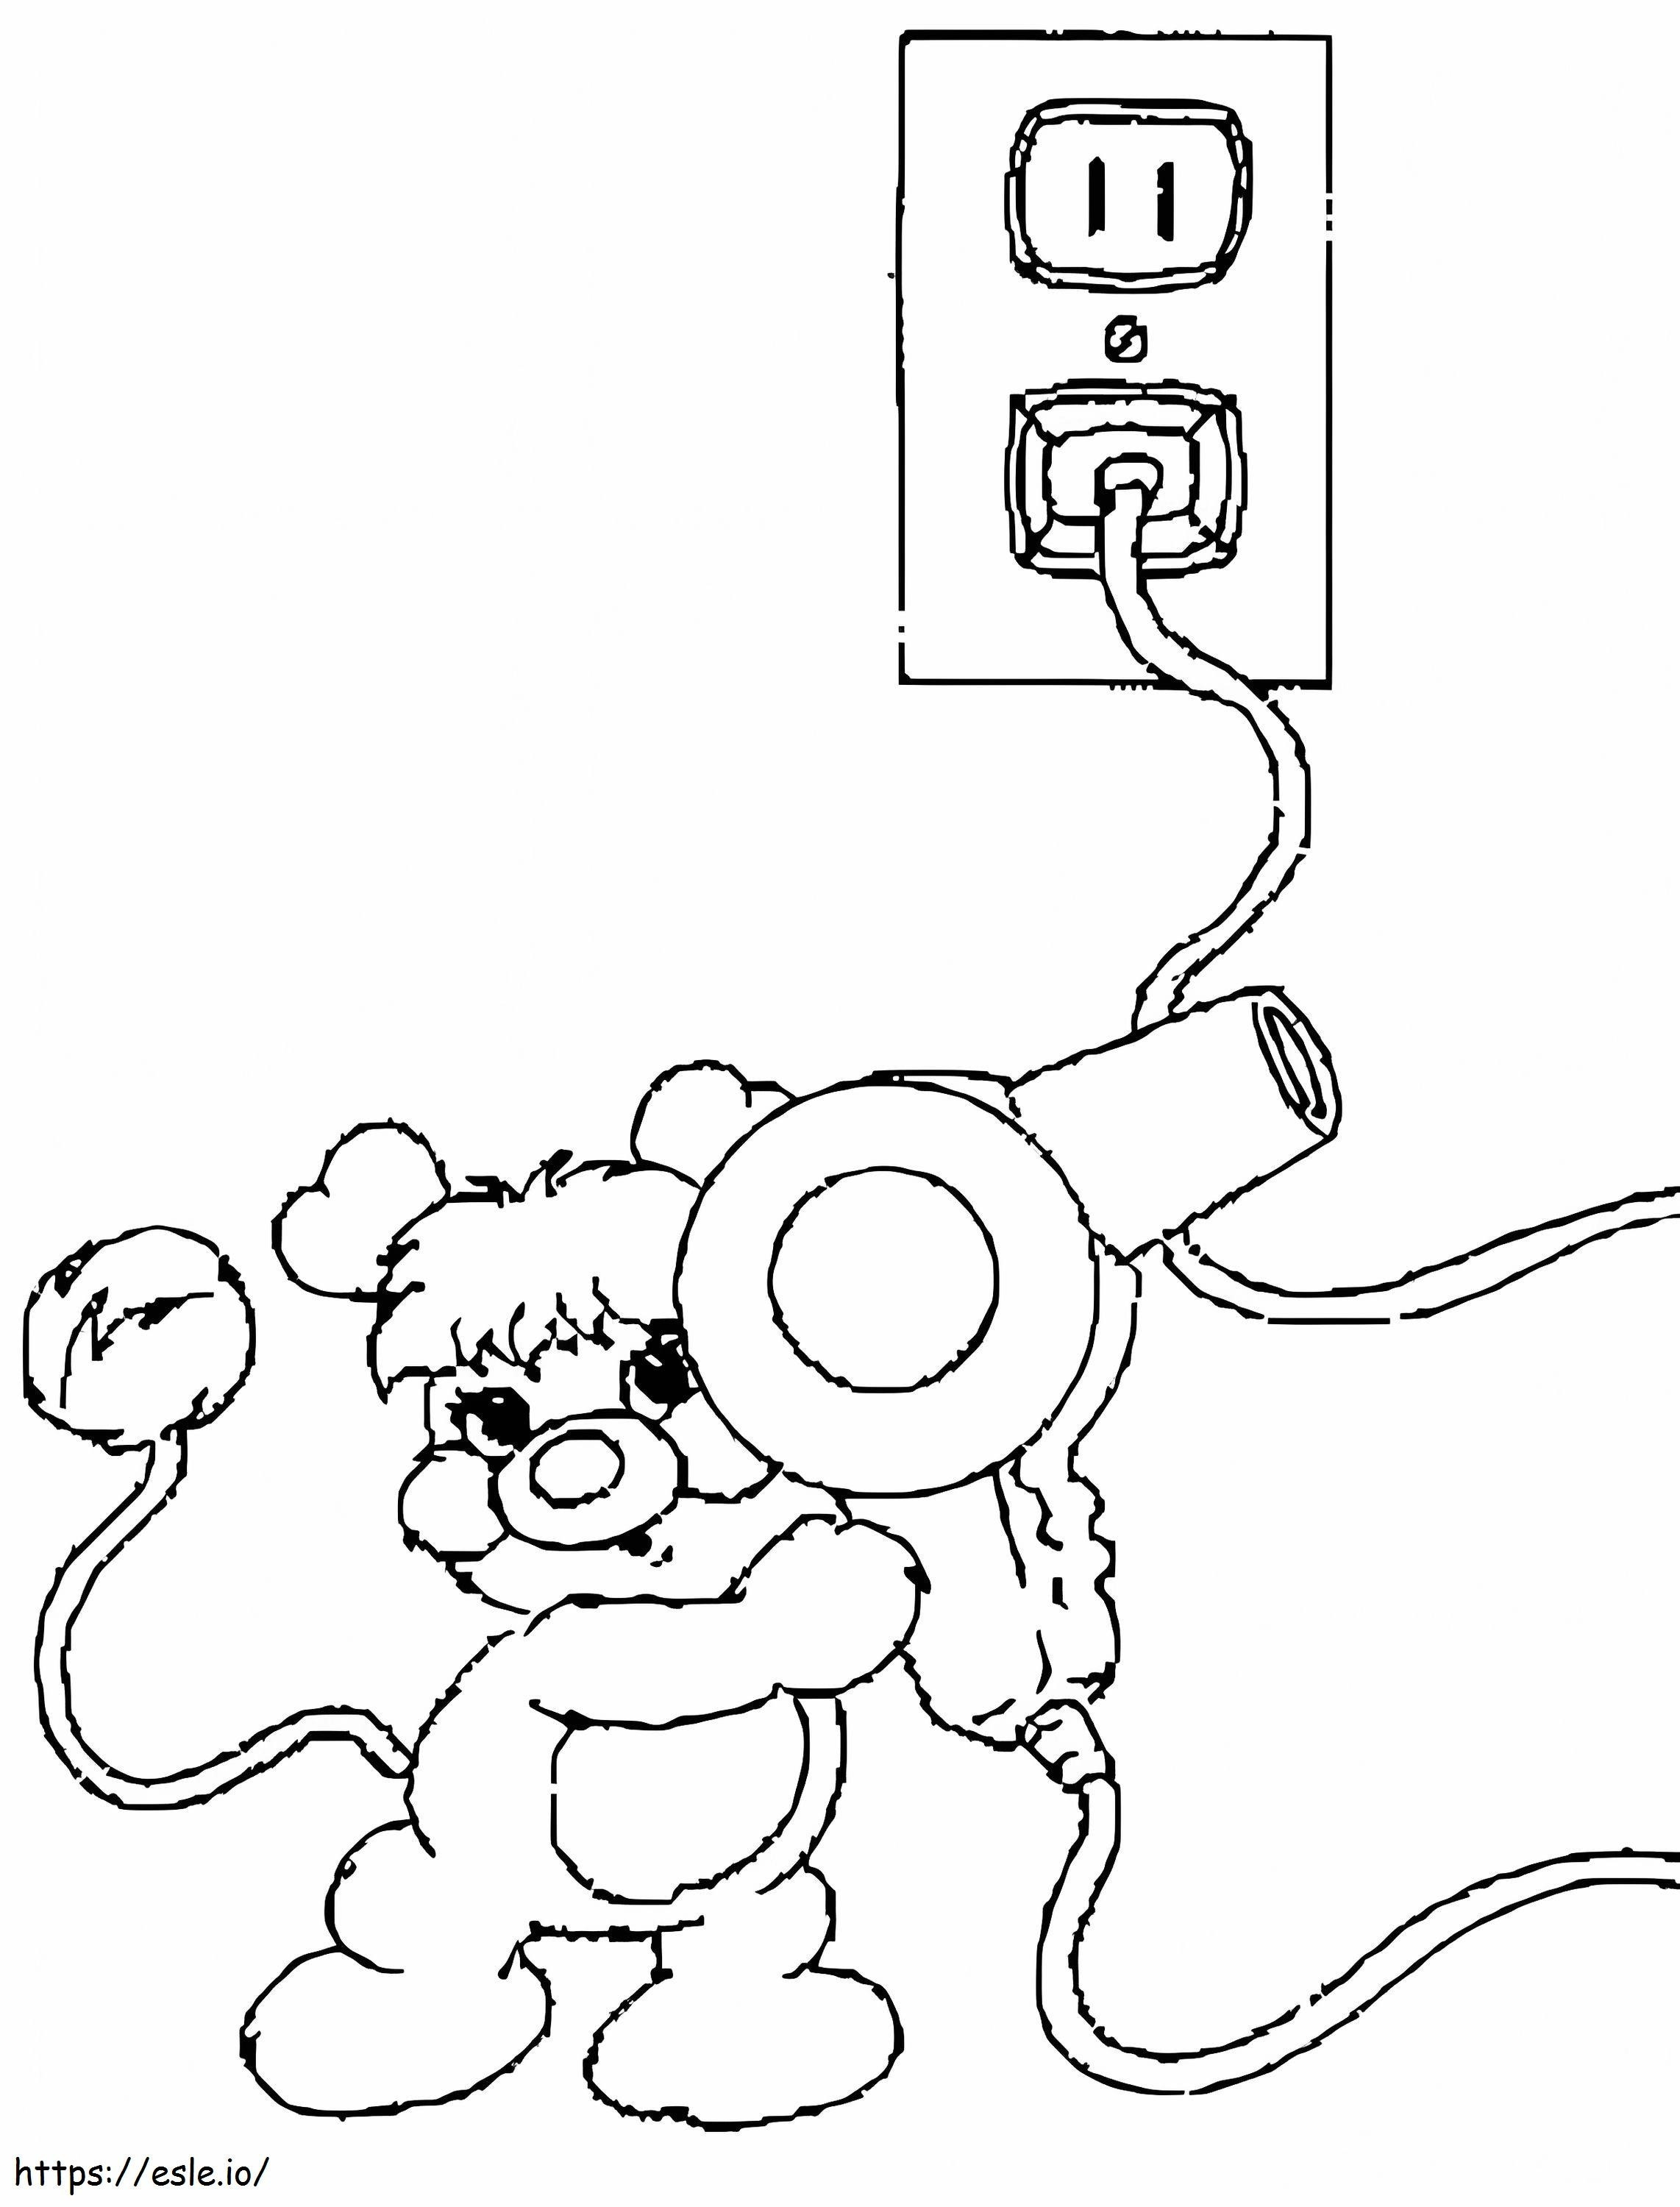 Popples 2 coloring page